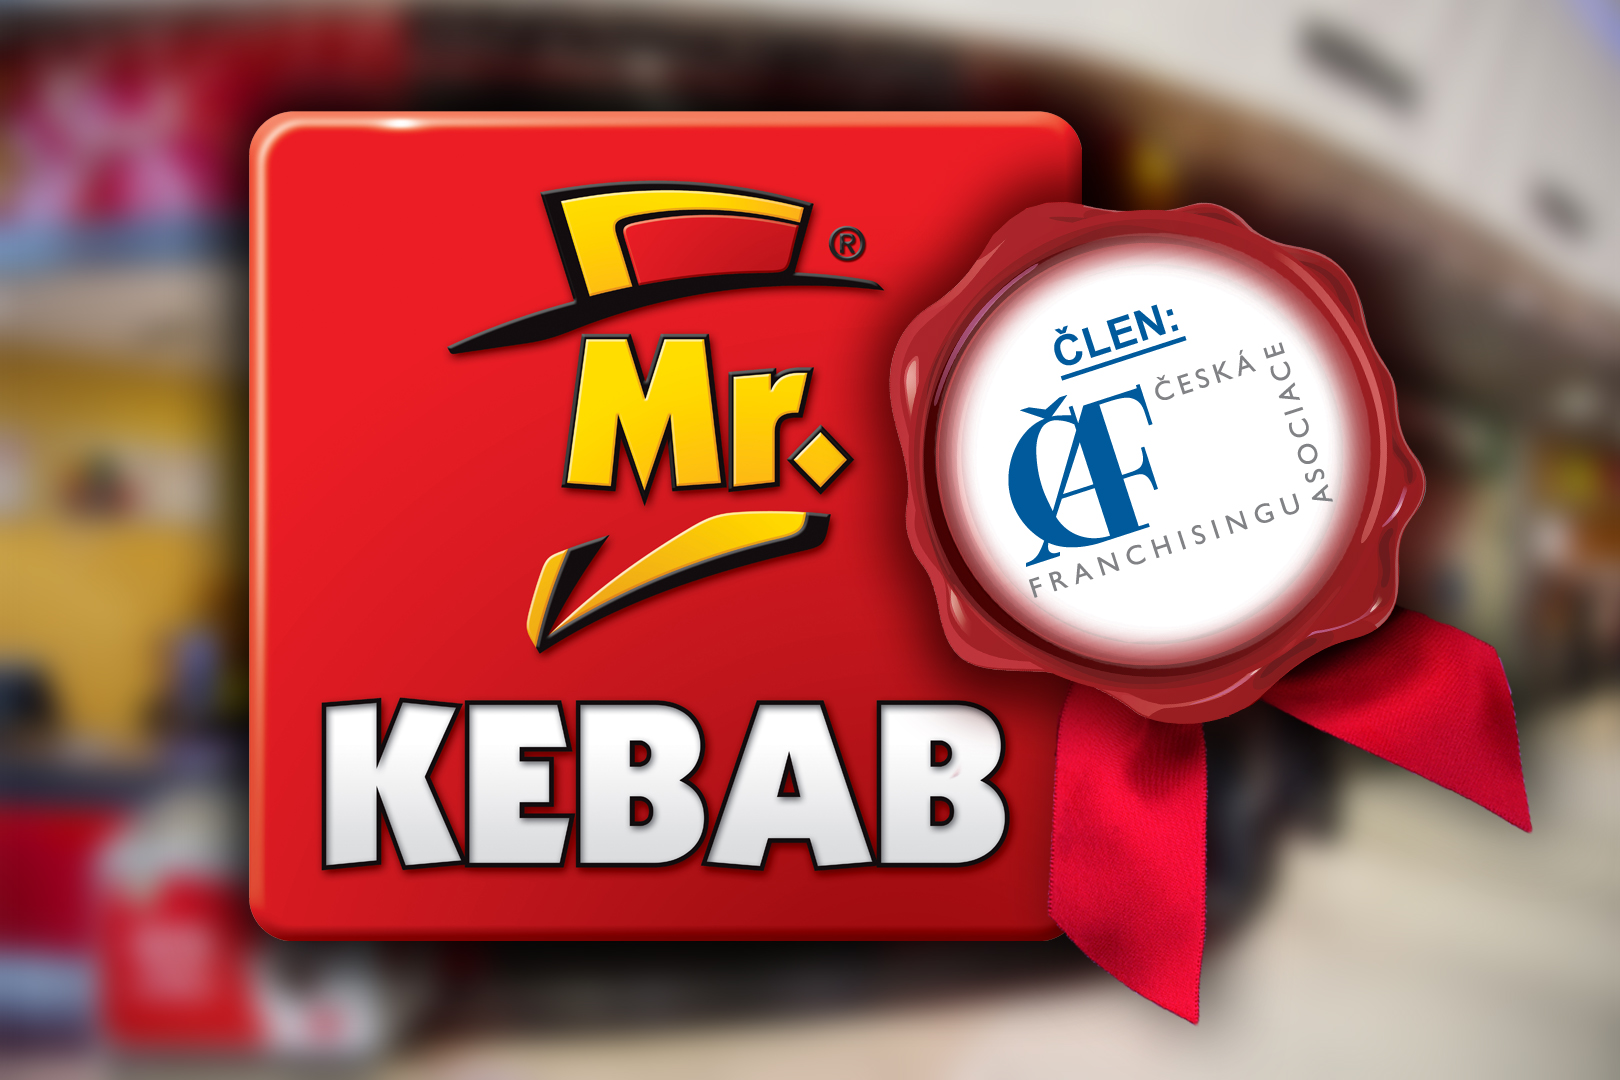 [Mr. KEBAB has become a full member of the ČAF]